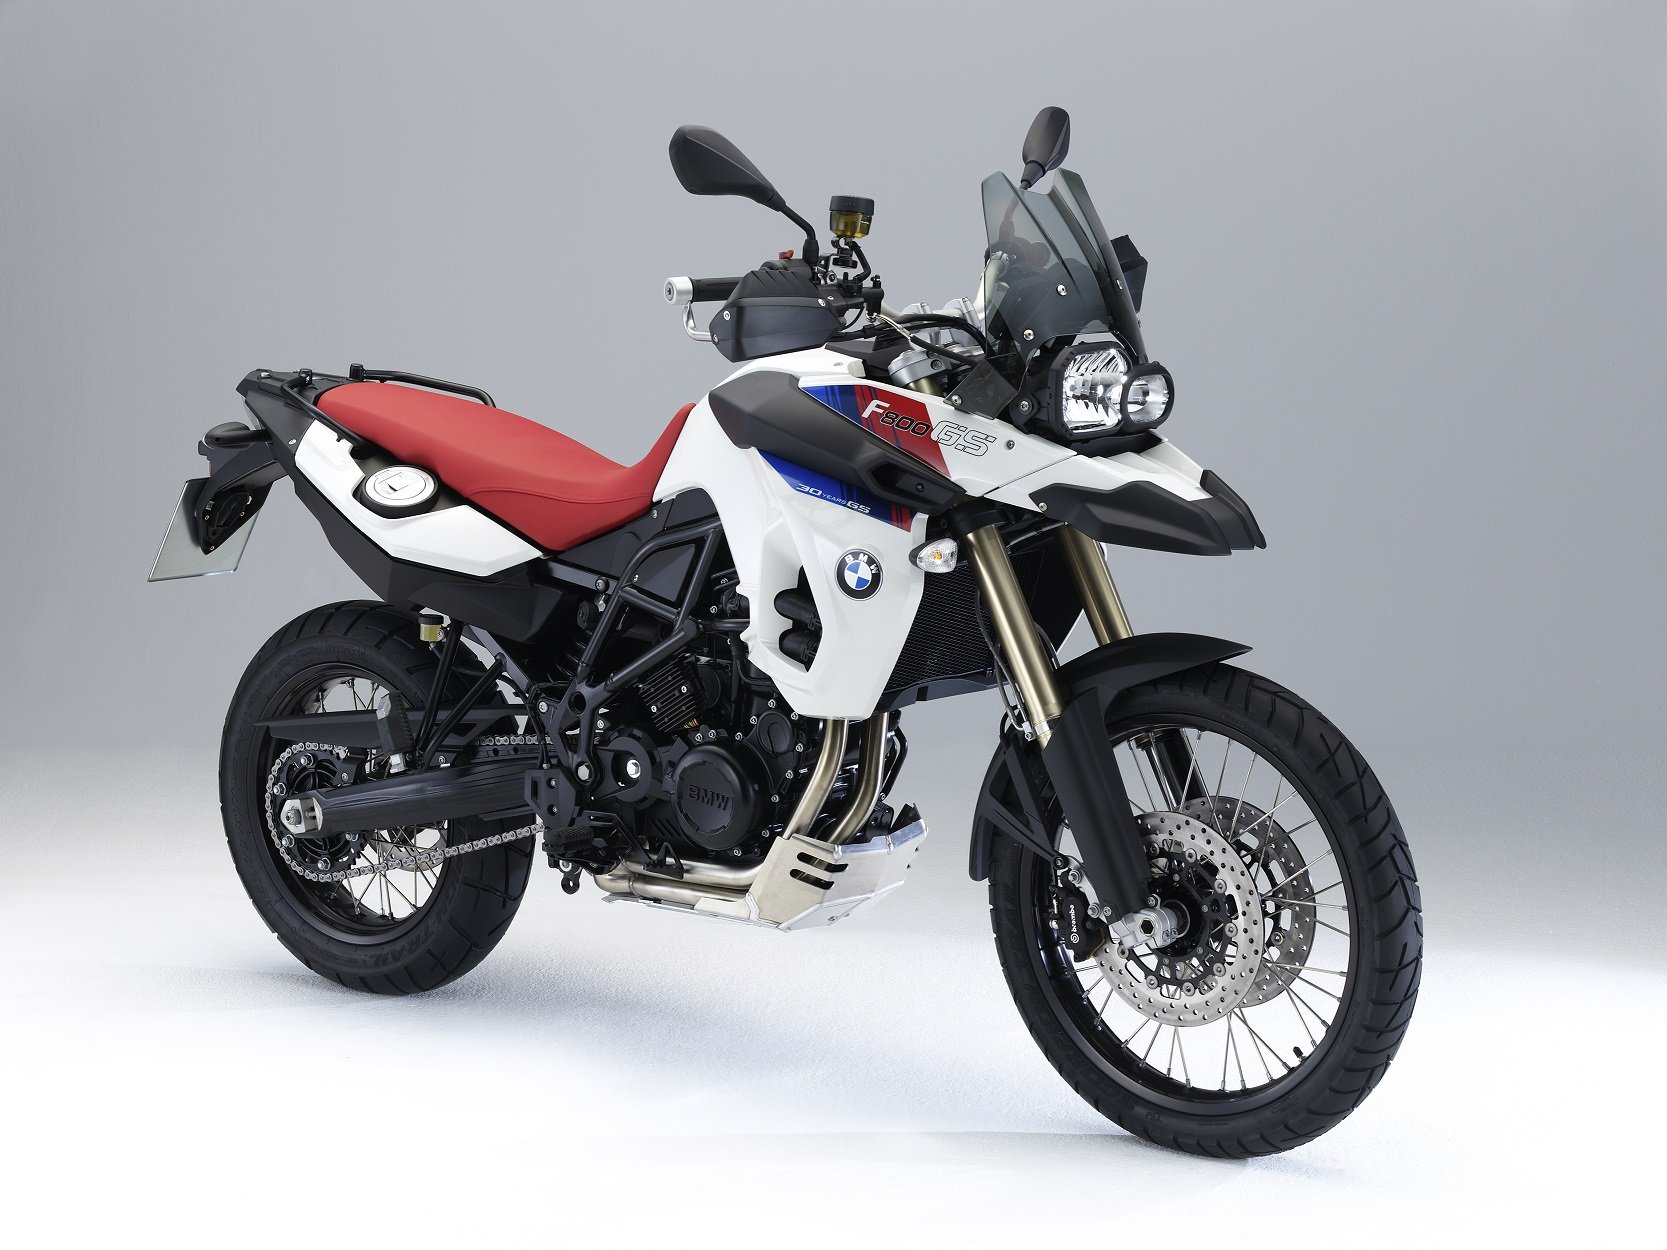 bmw, F 800 gs, 30 years, Motorcycles, 2010 Wallpaper